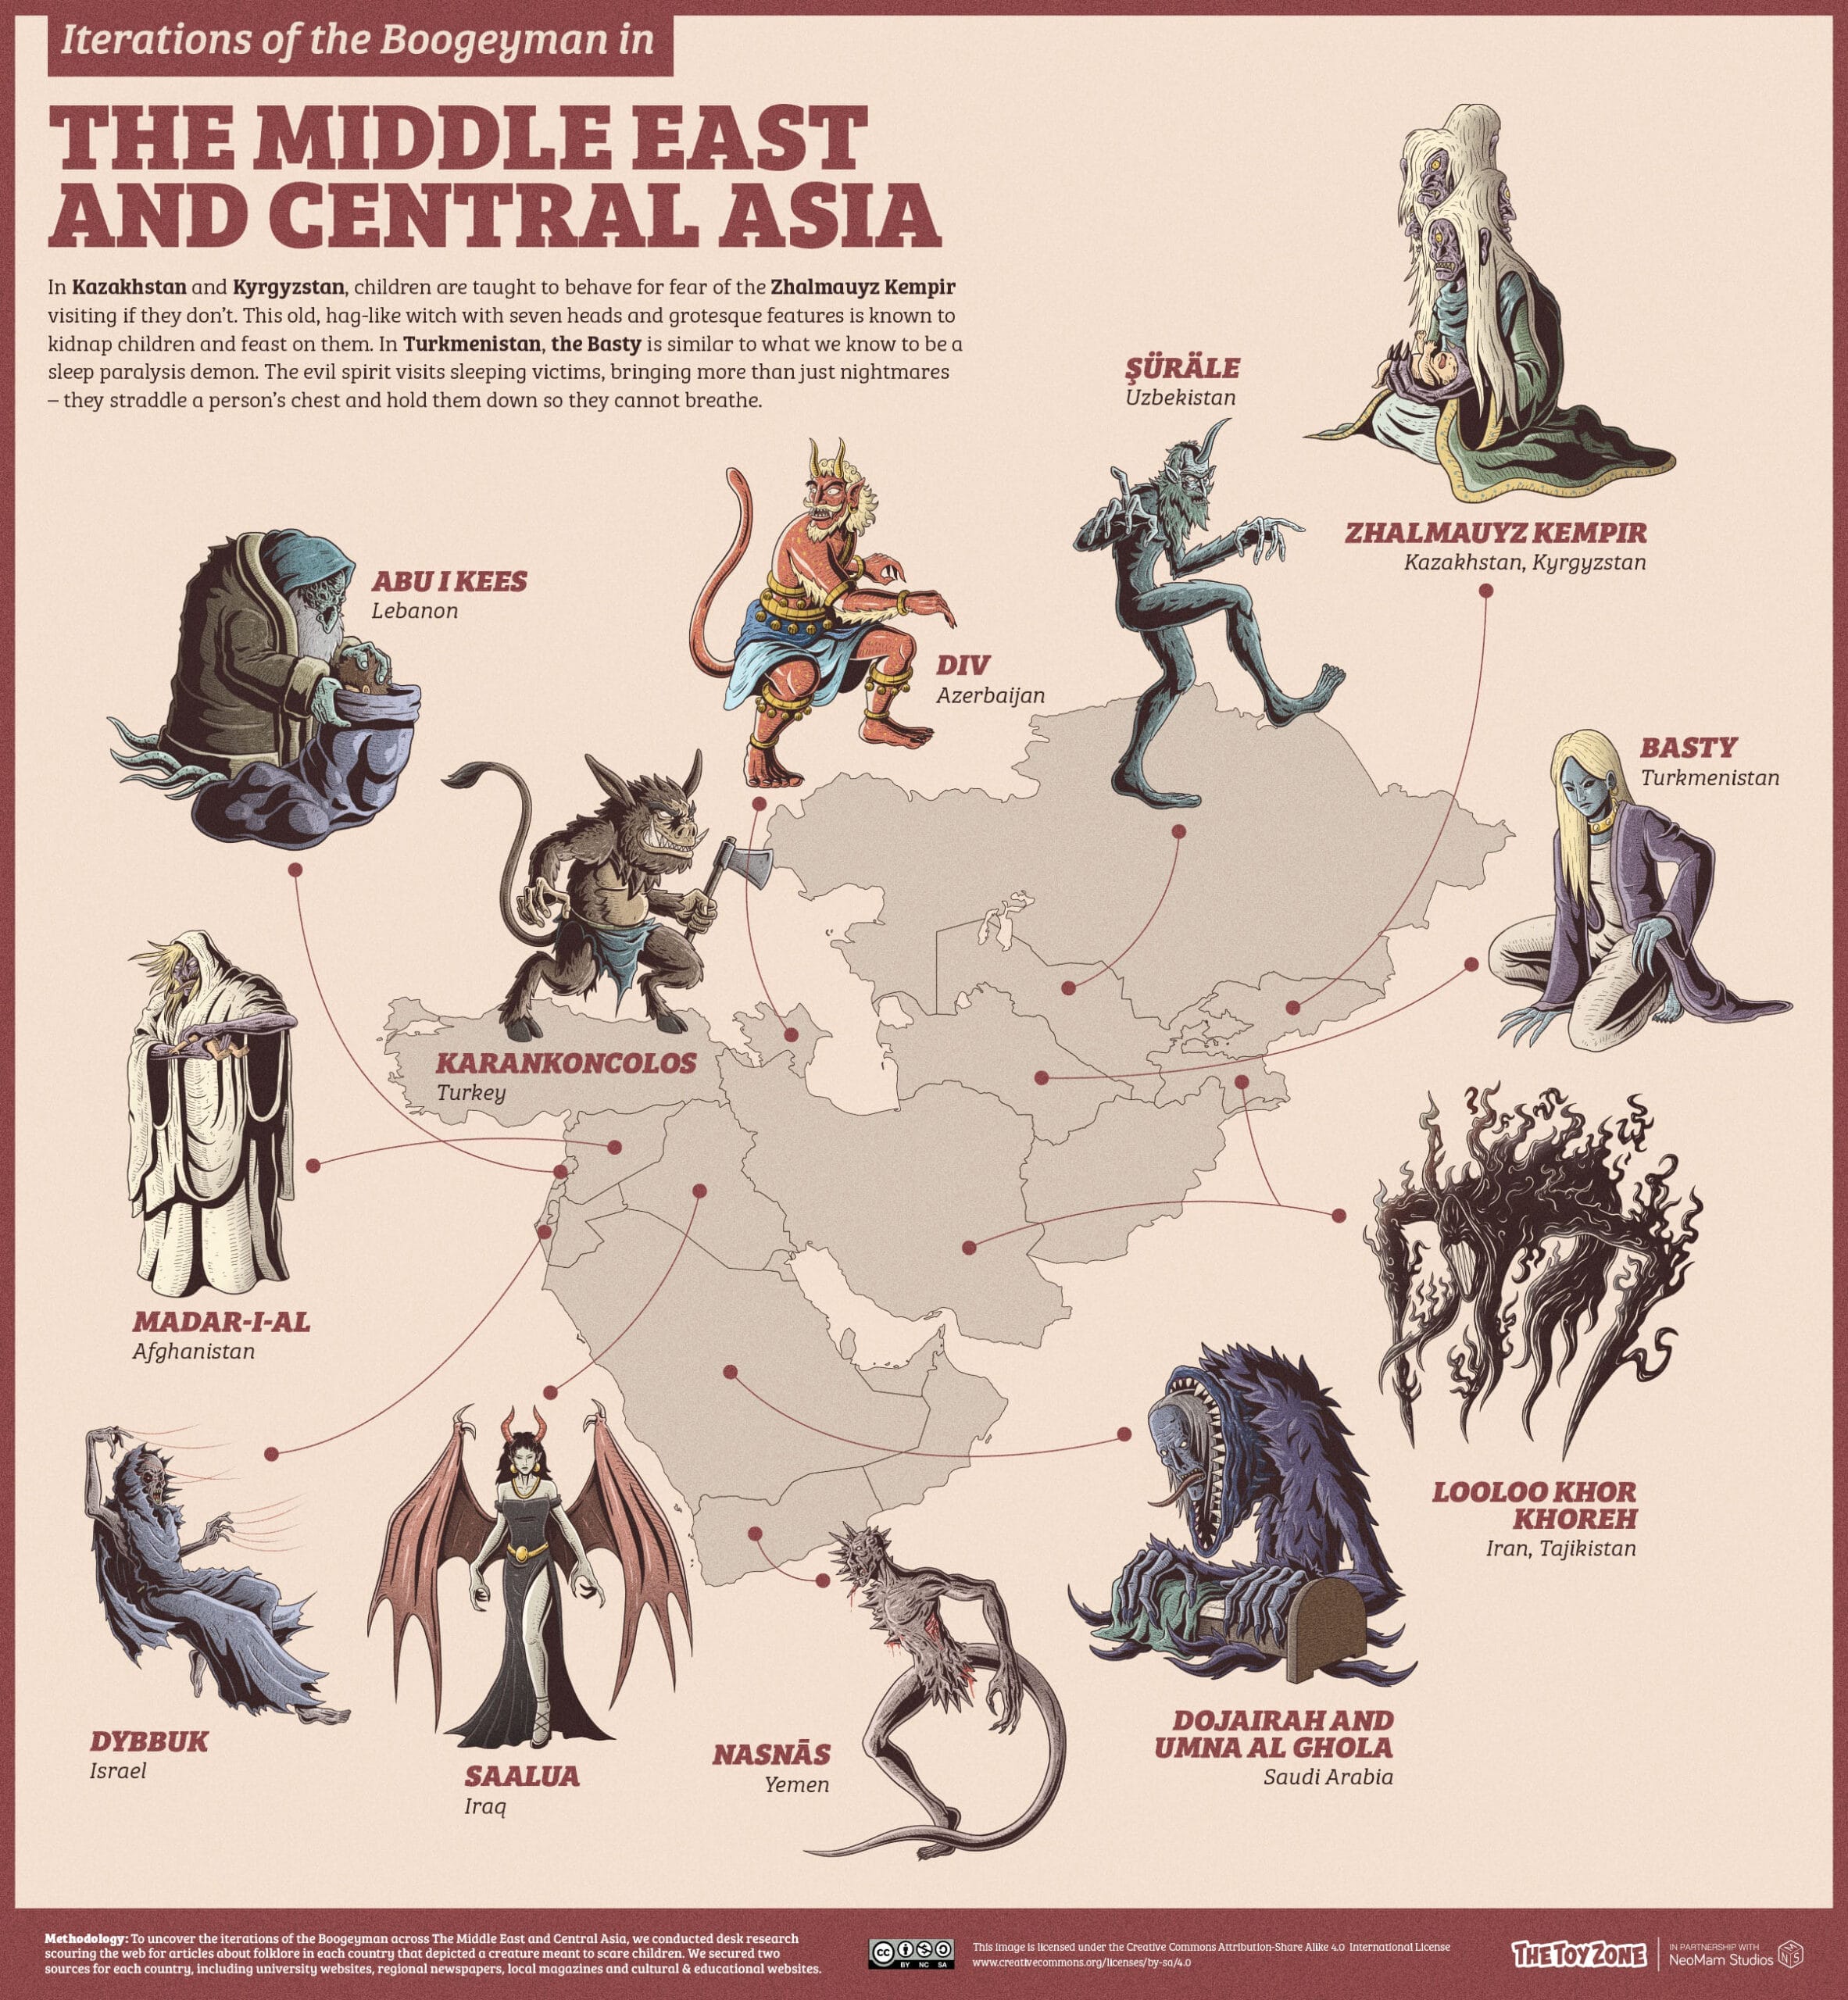 Folklore representations of the boogeyman in Central Asia and the Middle East